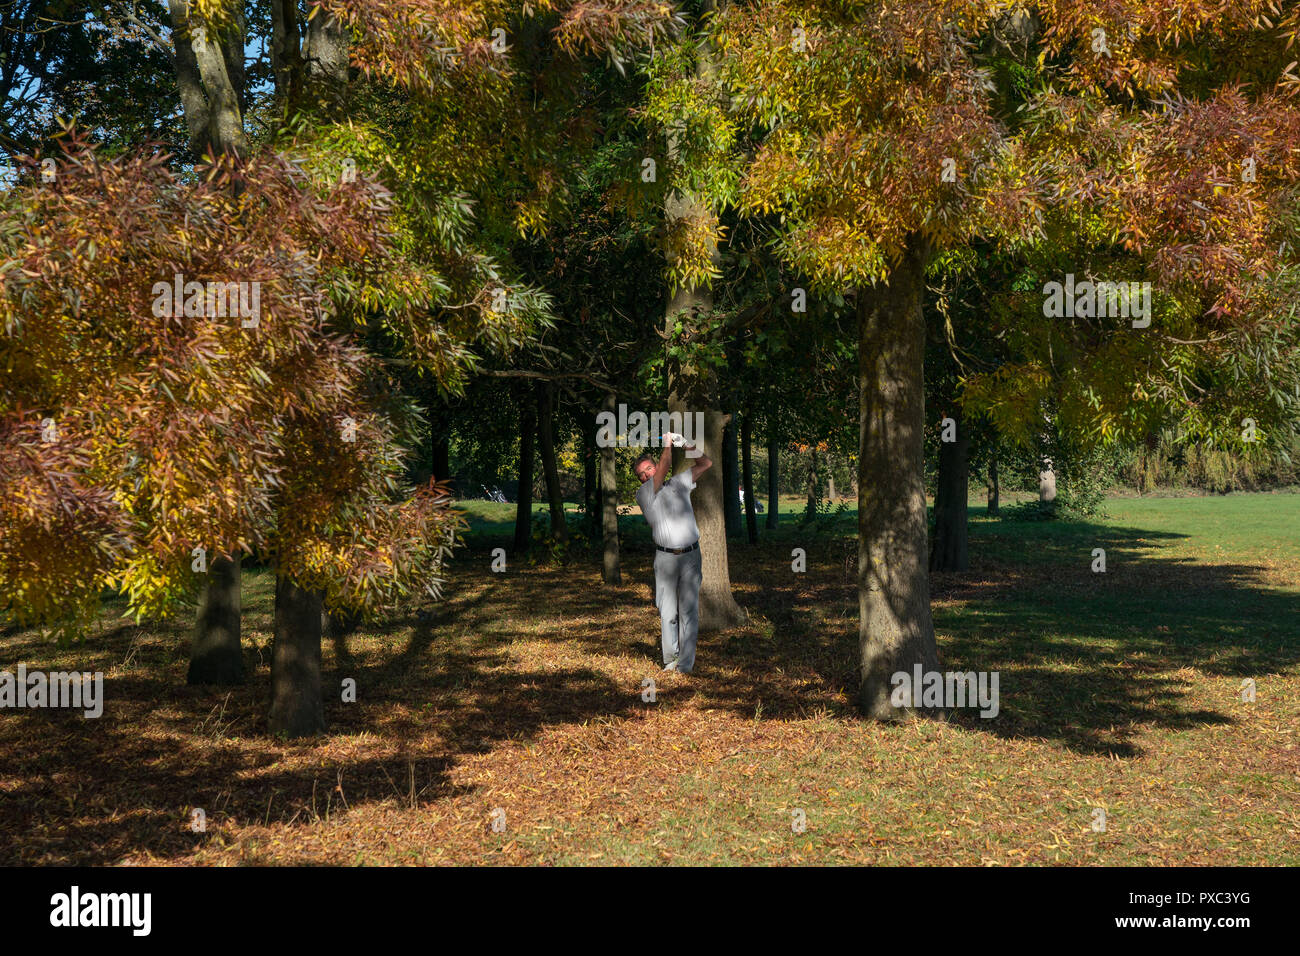 London, UK. 21st Oct 2018. Golfers enjoying sunny autumn weather on Brent Valley golf course in London. Photo date: Sunday, October 21, 2018. Photo: Roger Garfield/Alamy Entertainment Credit: Roger Garfield/Alamy Live News Stock Photo